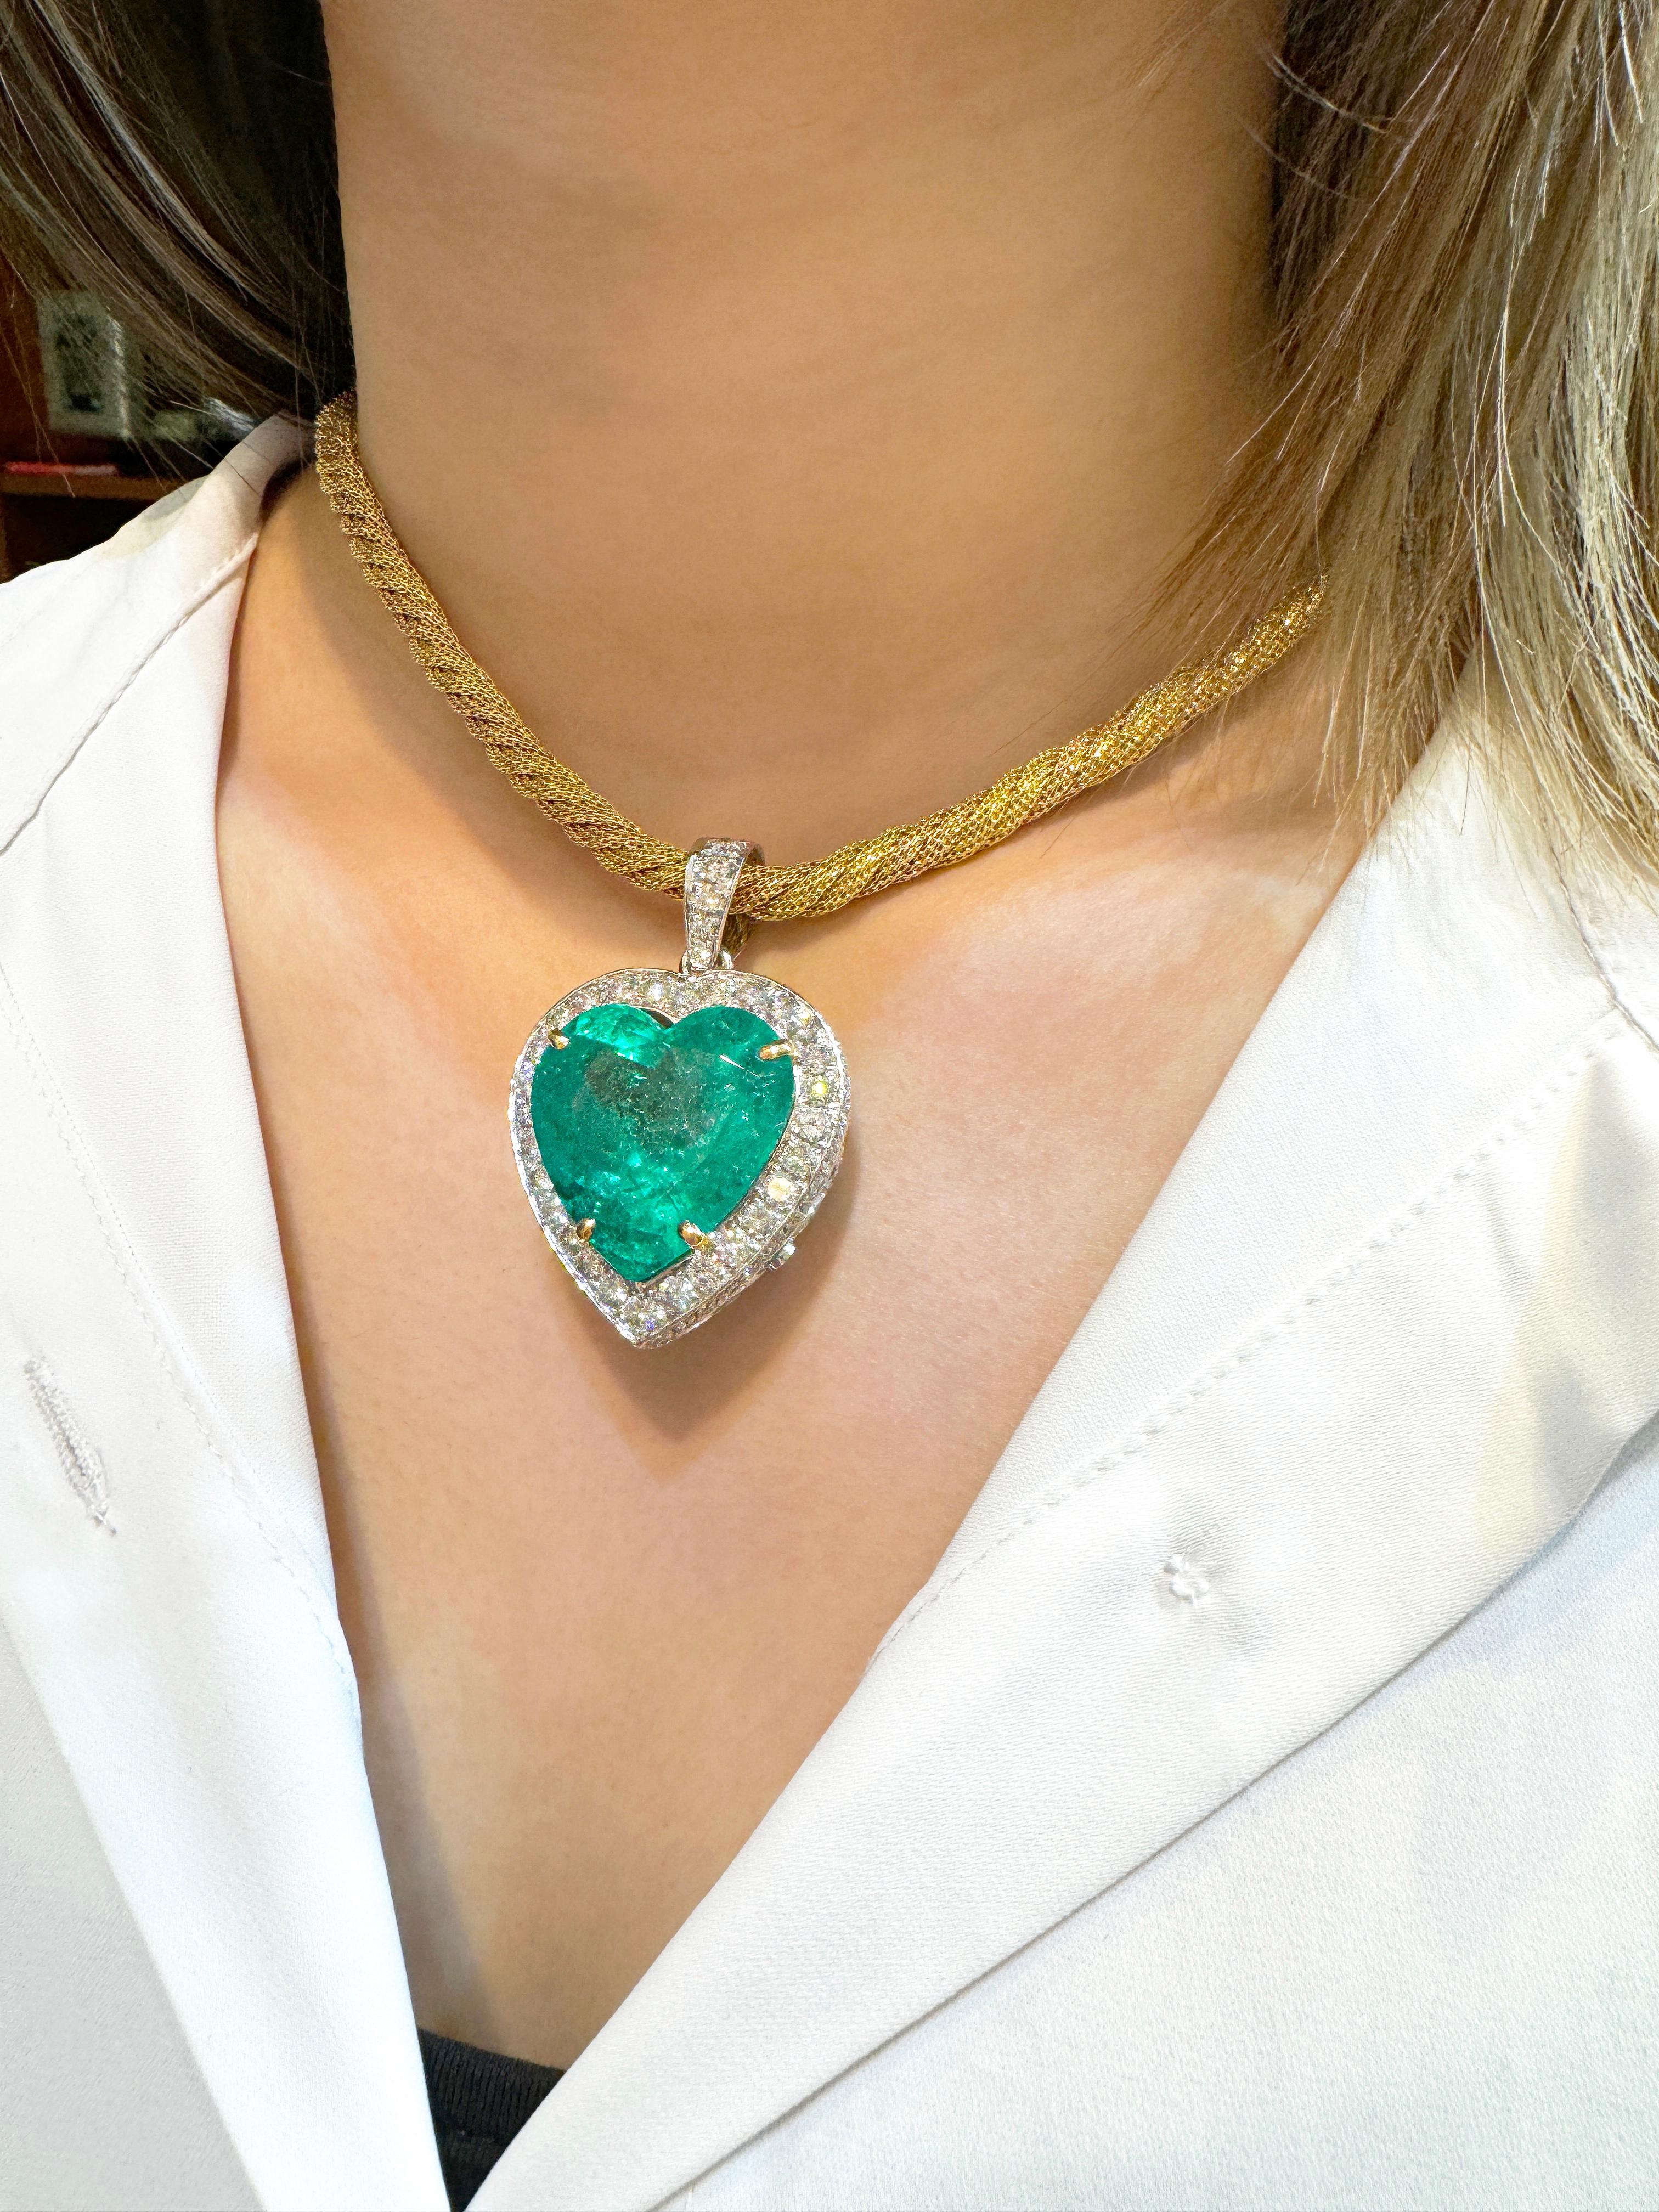 44 Carat Heart Shaped Green Emerald Pendant with Diamond Side Stone in 18K Gold  For Sale 2